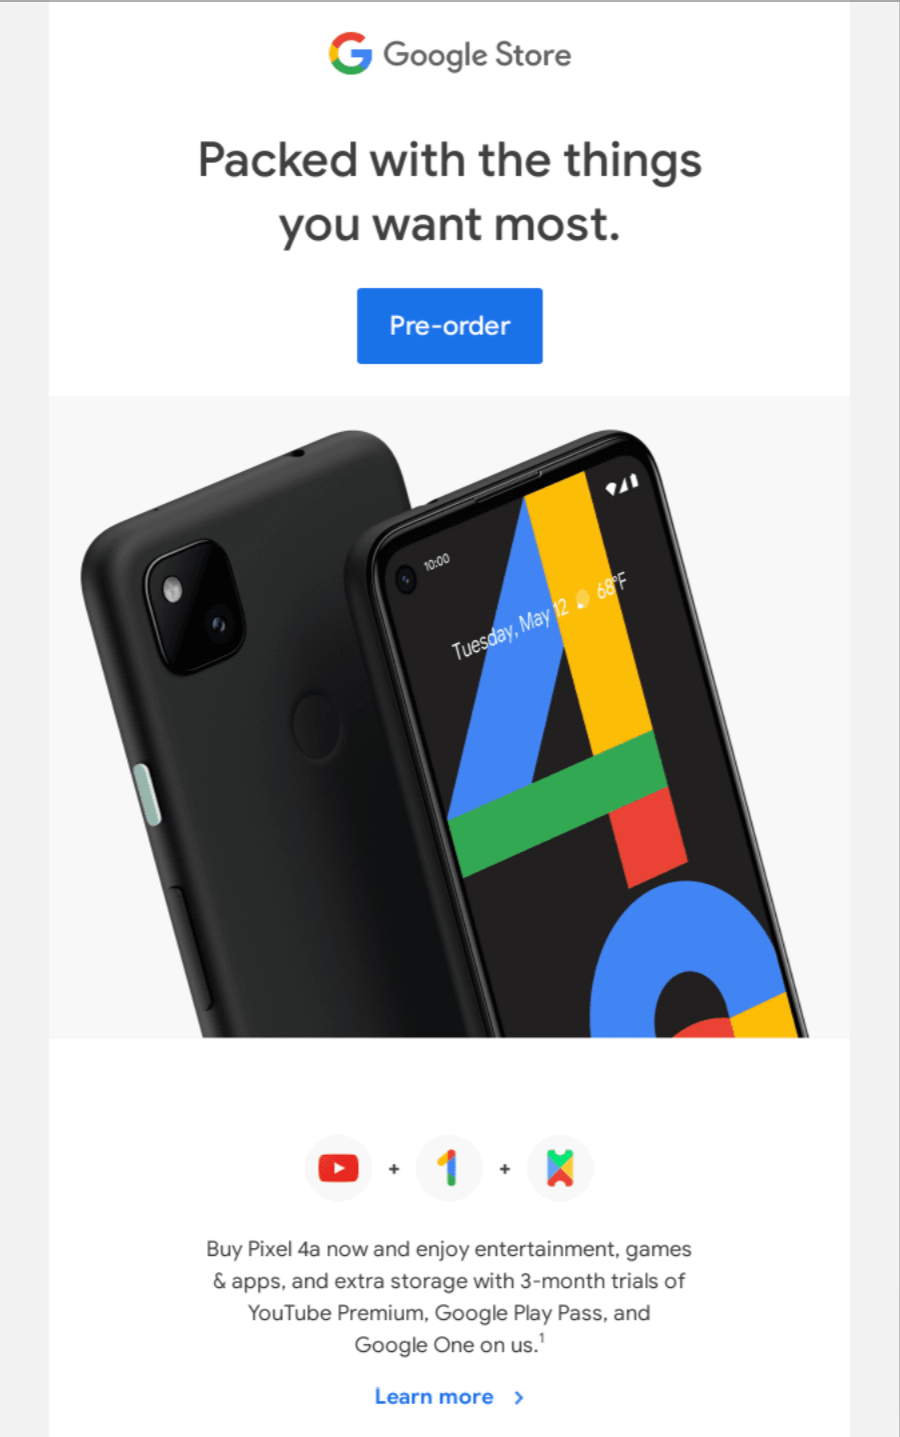 google product launch example